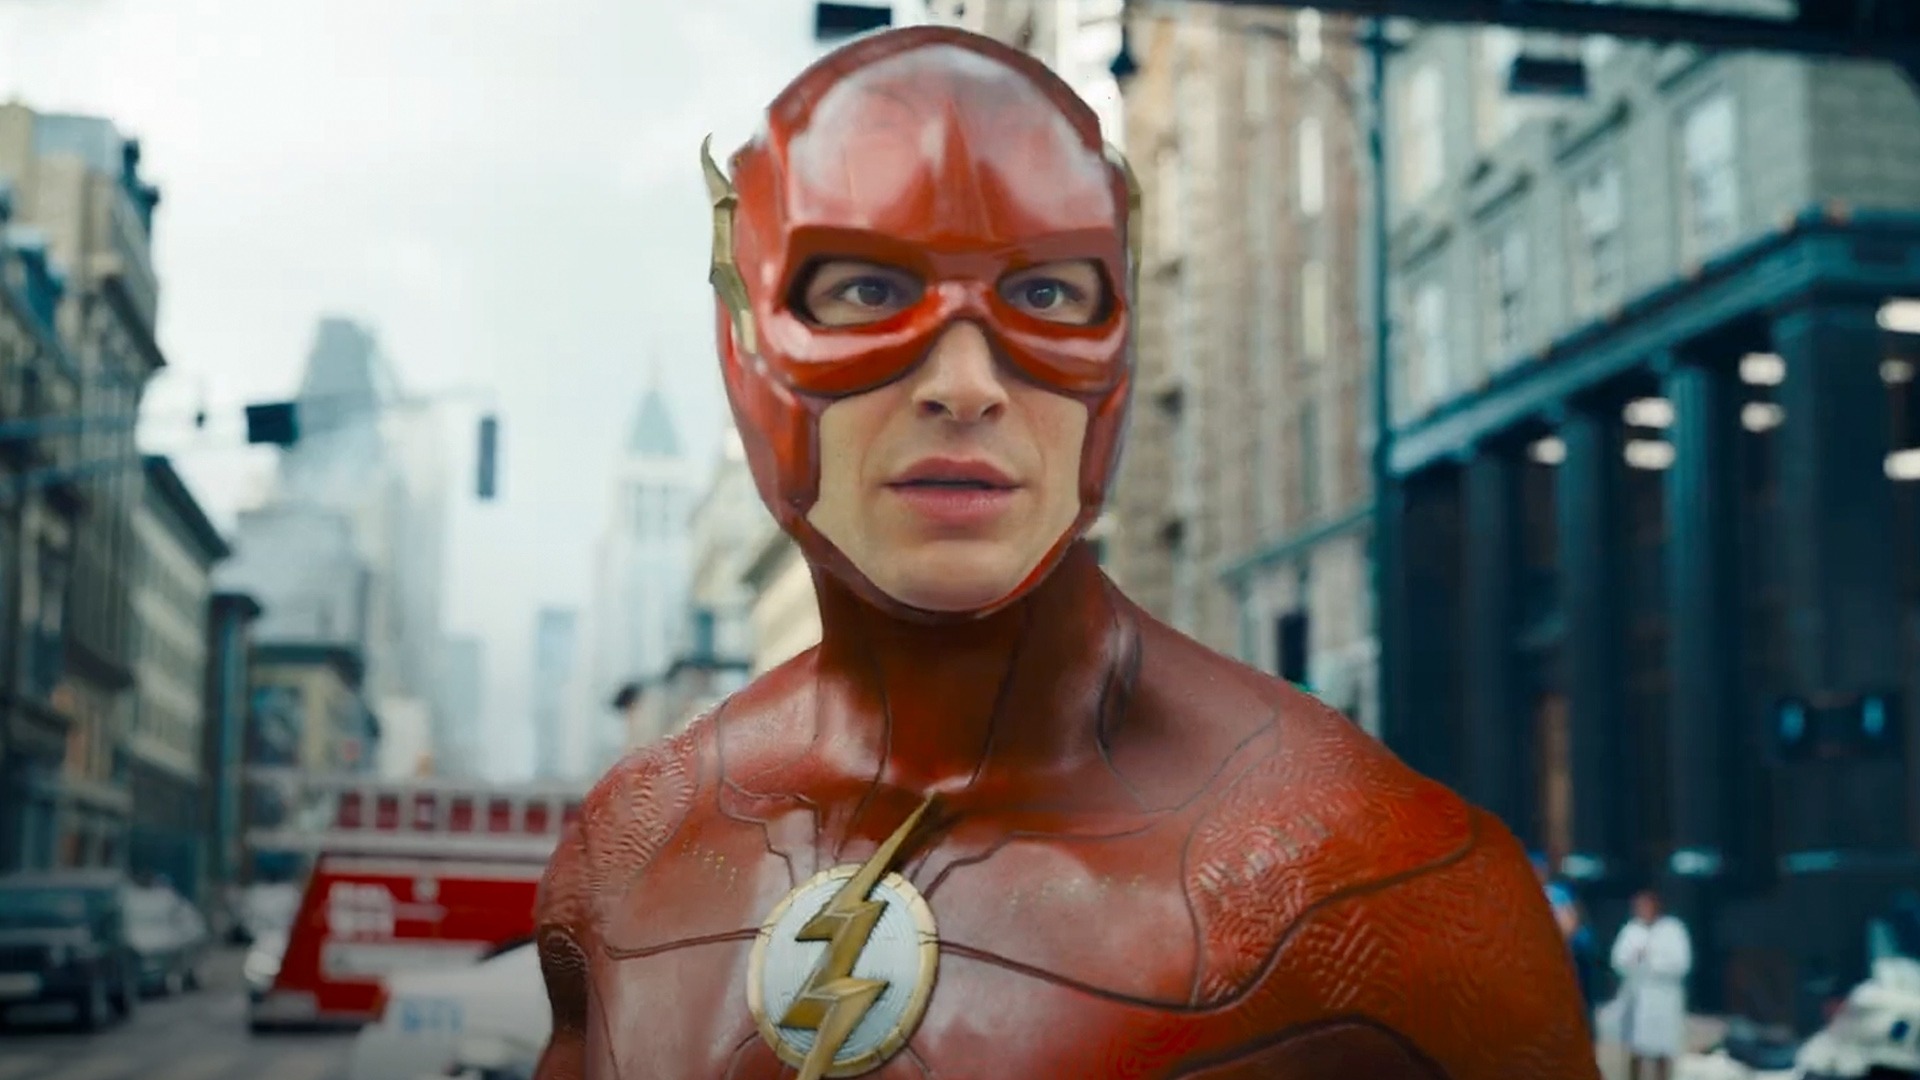 The Flash - Official Trailer 2 